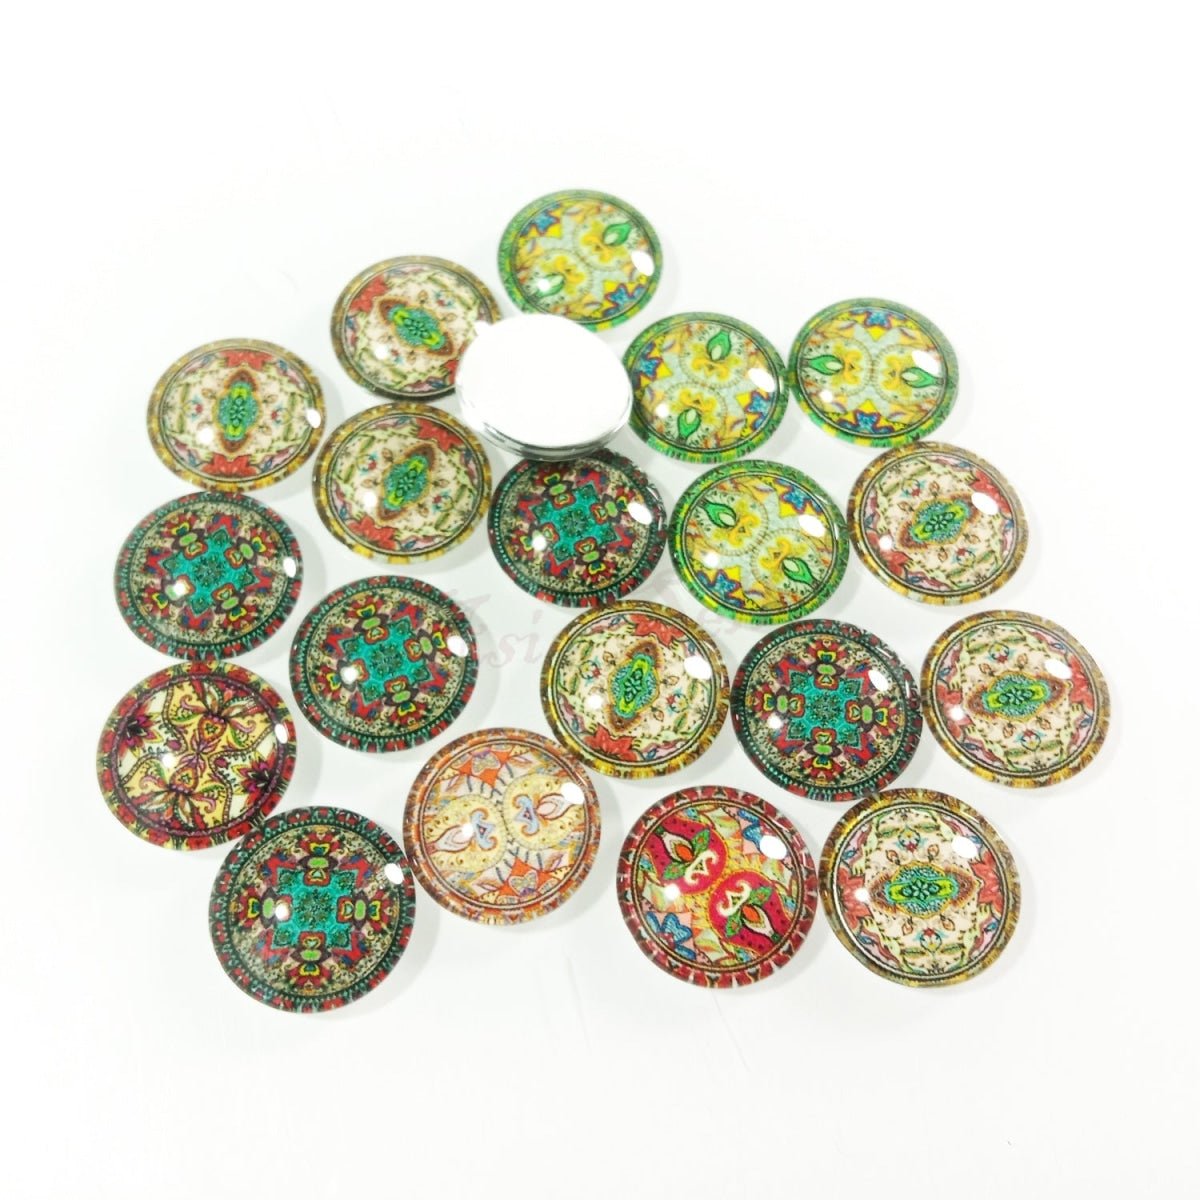 20pcs Round Glass Cabochon Mozaic Pattern Mixed for Cameo Base Setting Flat Back Jewellery - 18mm - - Asia Sell